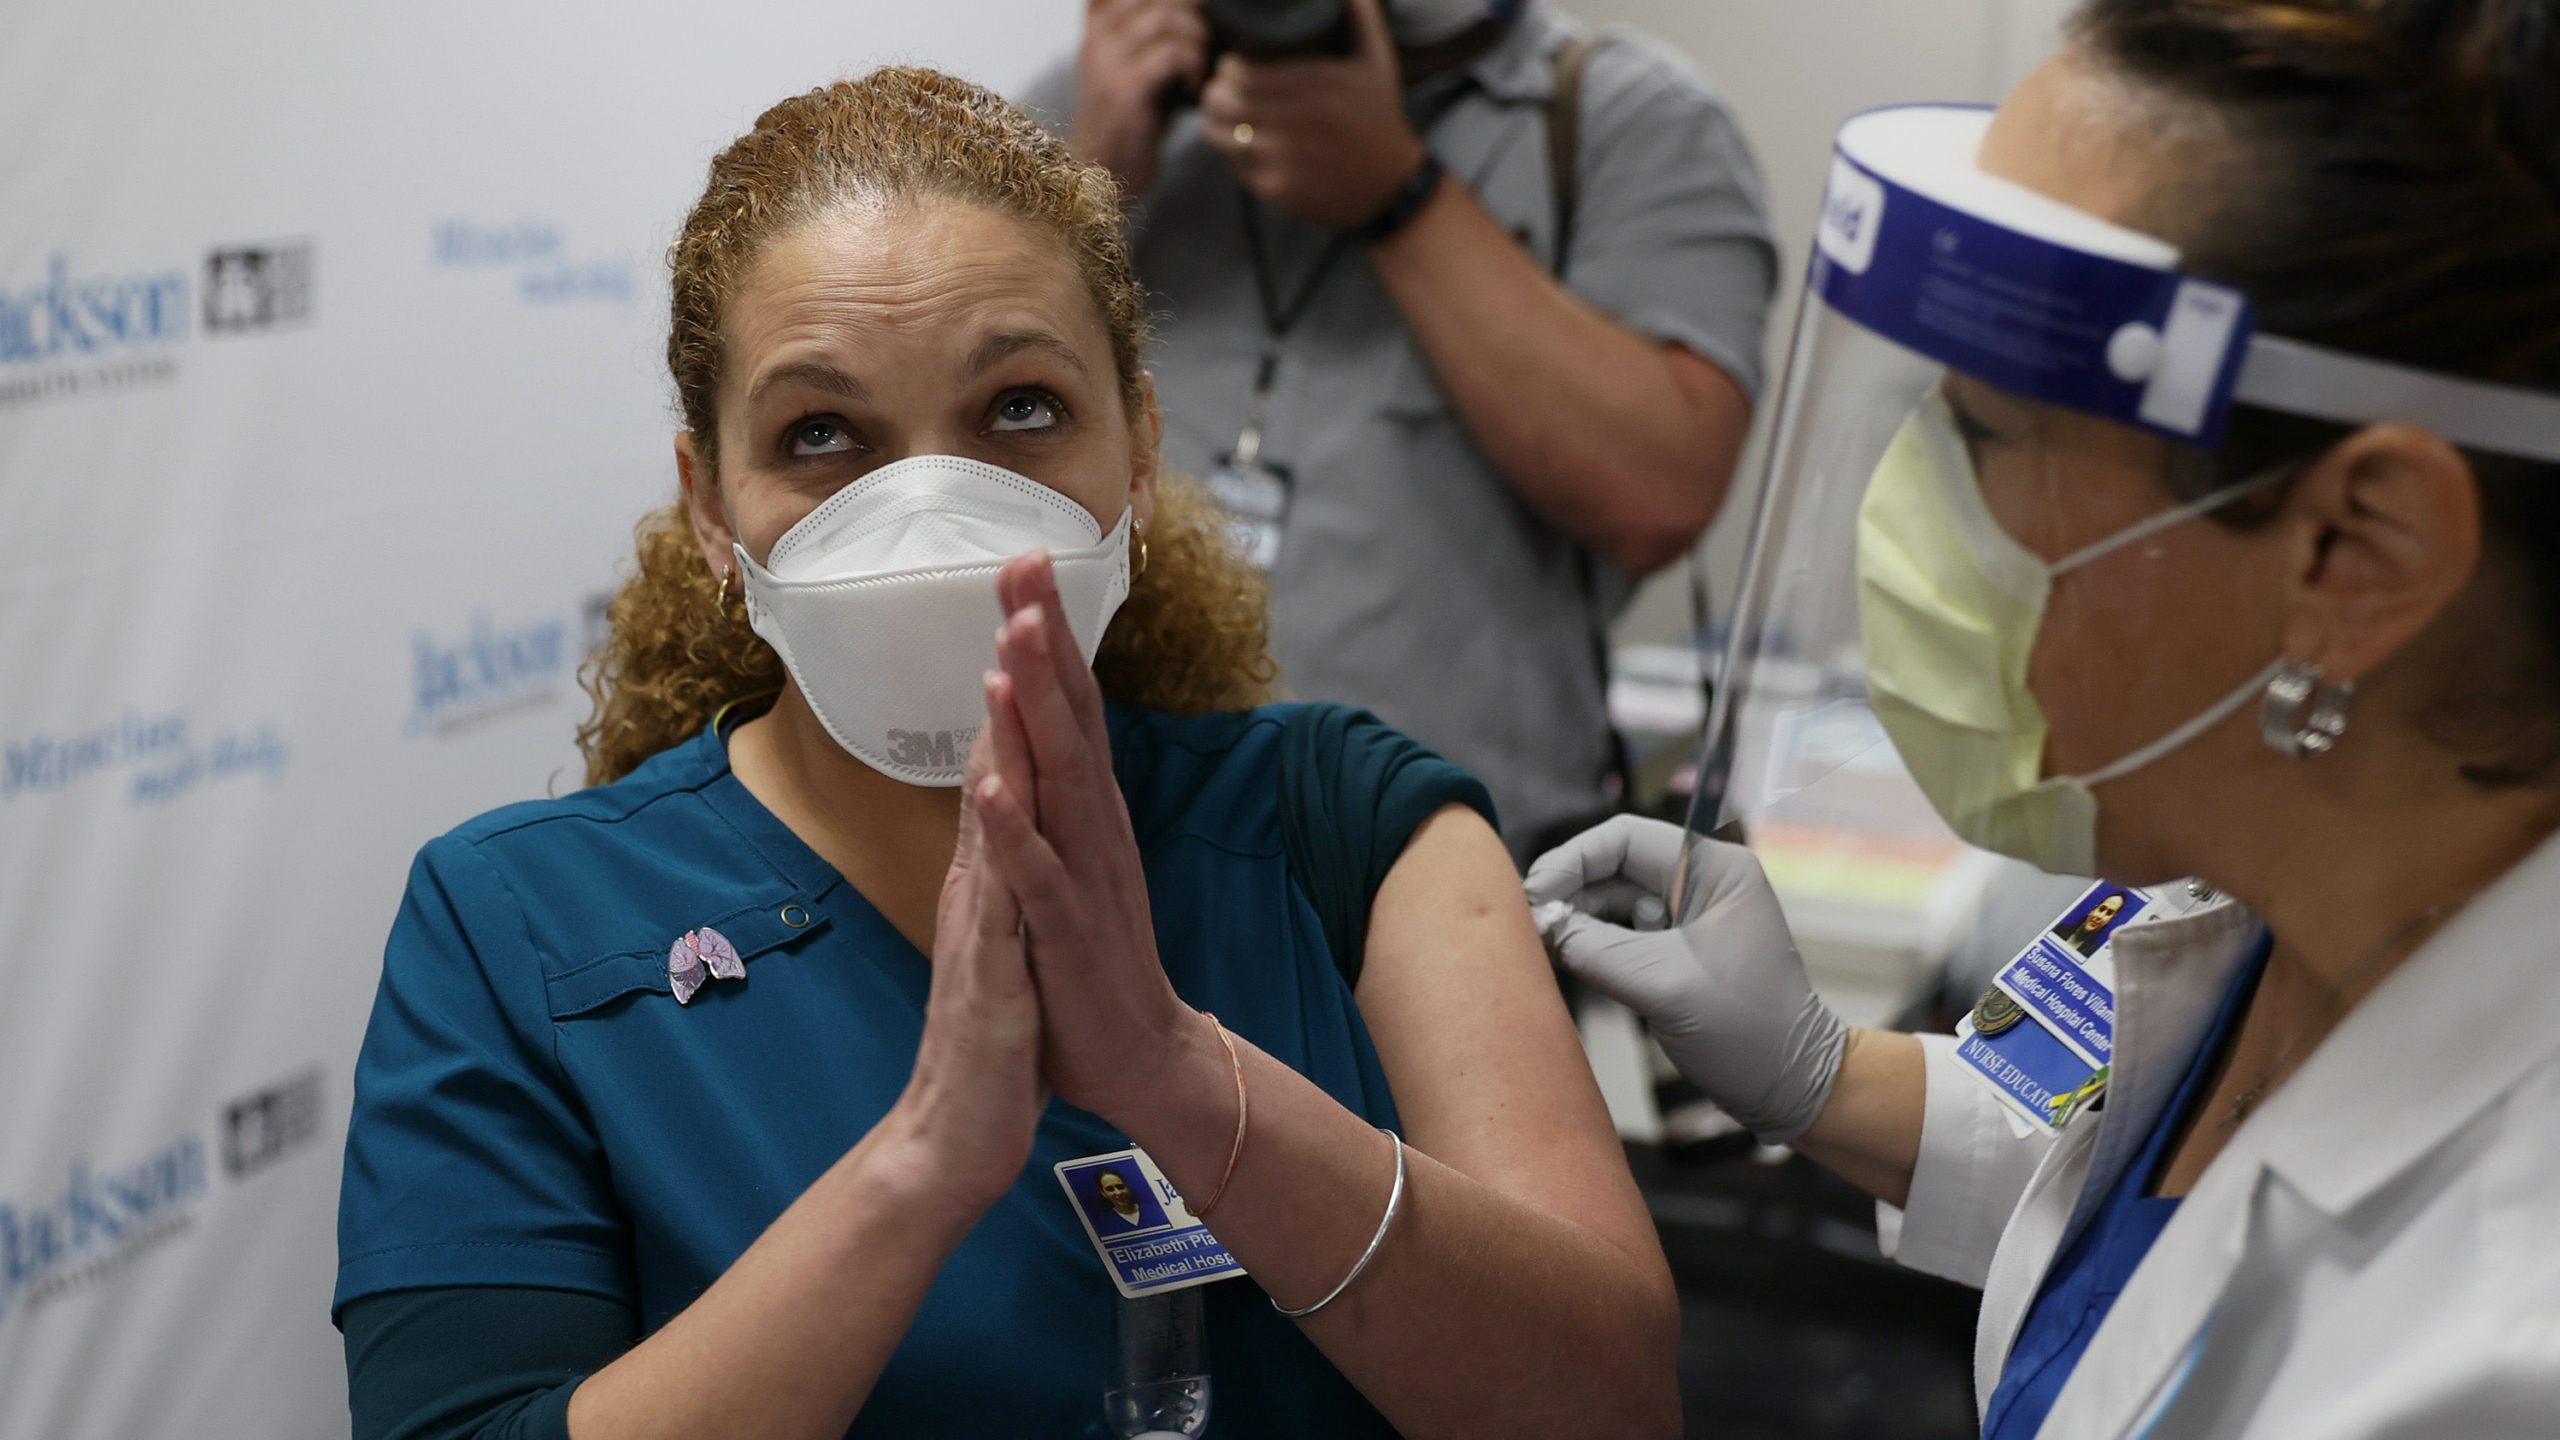 Elizabeth Plasencia, RRT Medical Hospital Centre at the Jackson Health Systems, clasps her hands together after receiving a Pfizer/BioNtech covid-19 vaccine from Susana Flores Villamil, RN from Jackson Health Systems, at the Jackson Memorial Hospital on December 15, 2020 in Miami, Florida.  (Photo: Joe Raedle, Getty Images)